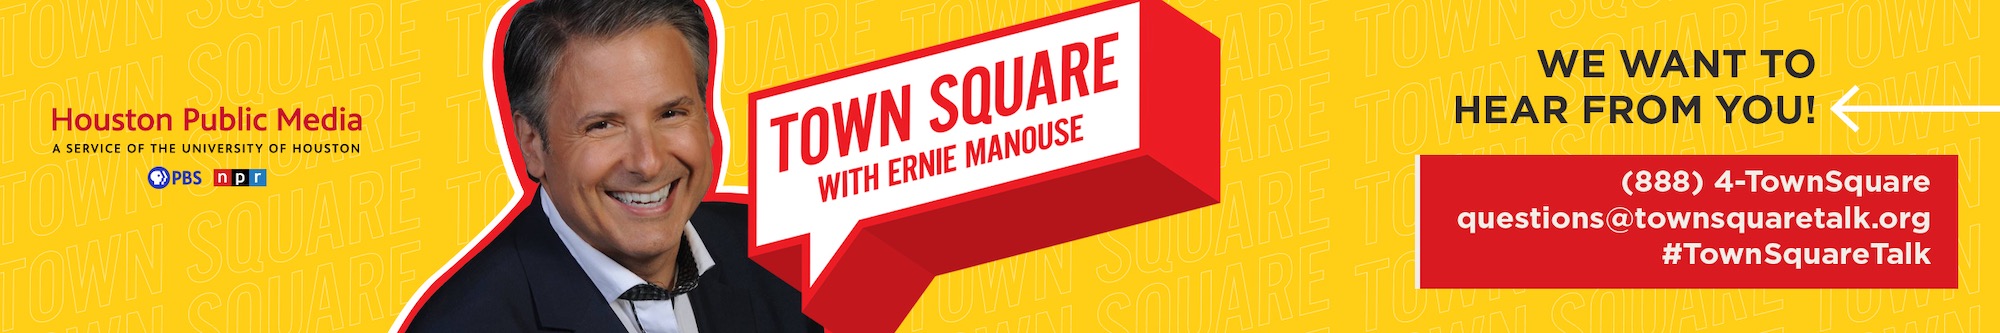 Town Square with Ernie Manouse page banner